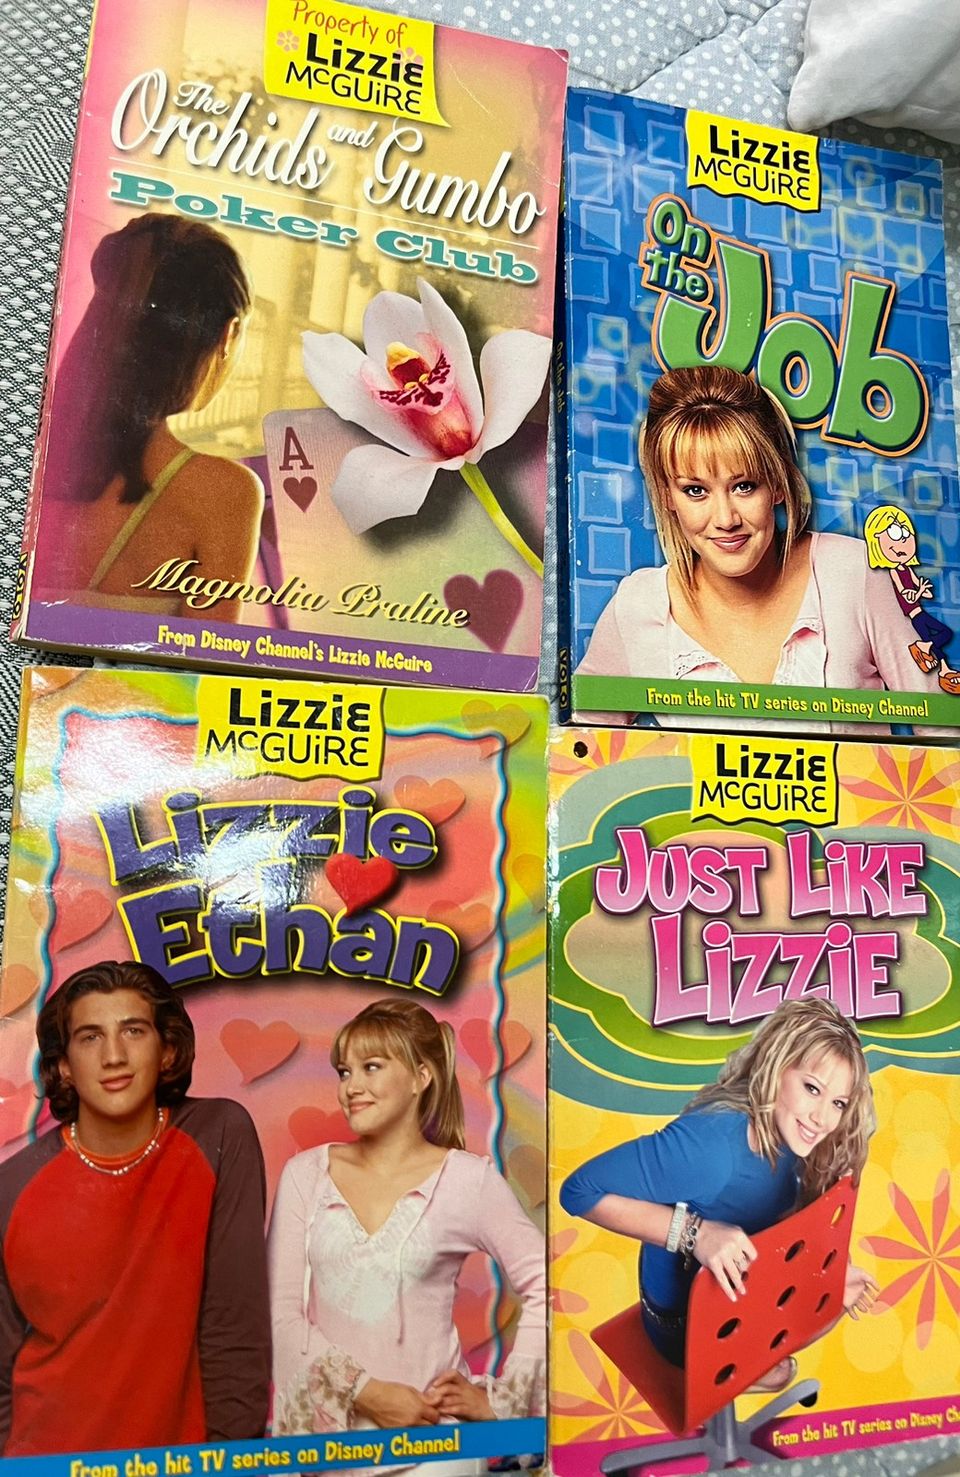 English books for kids - Lizzie McGuire